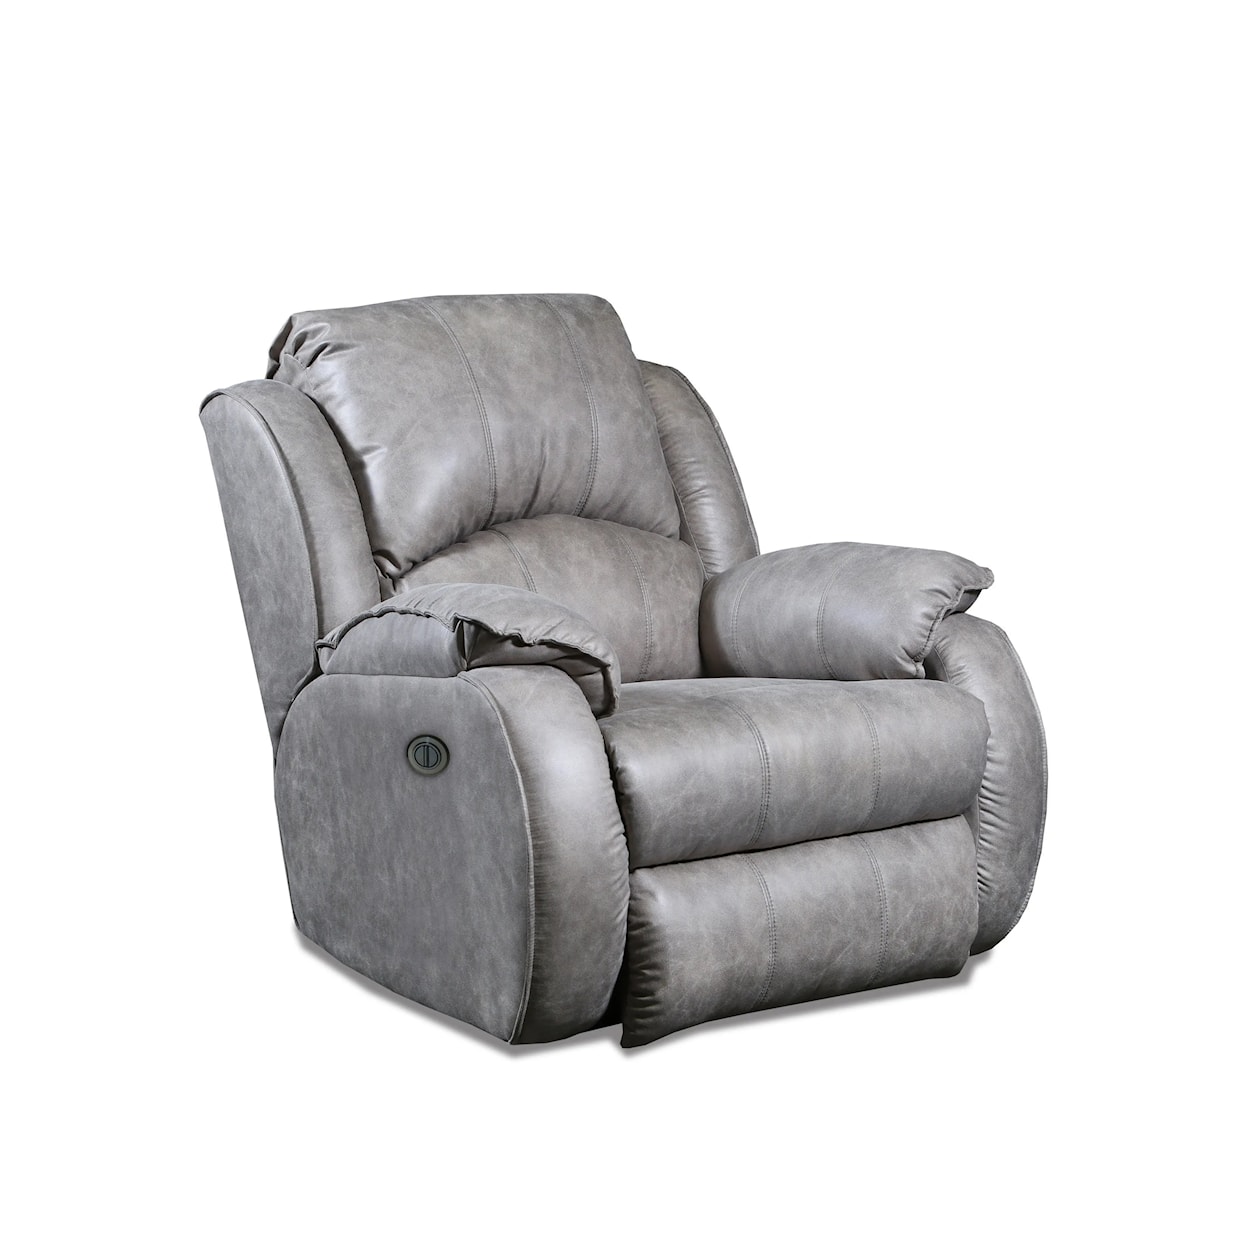 Southern Motion CAGNEY Power Wall Hugger Recliner